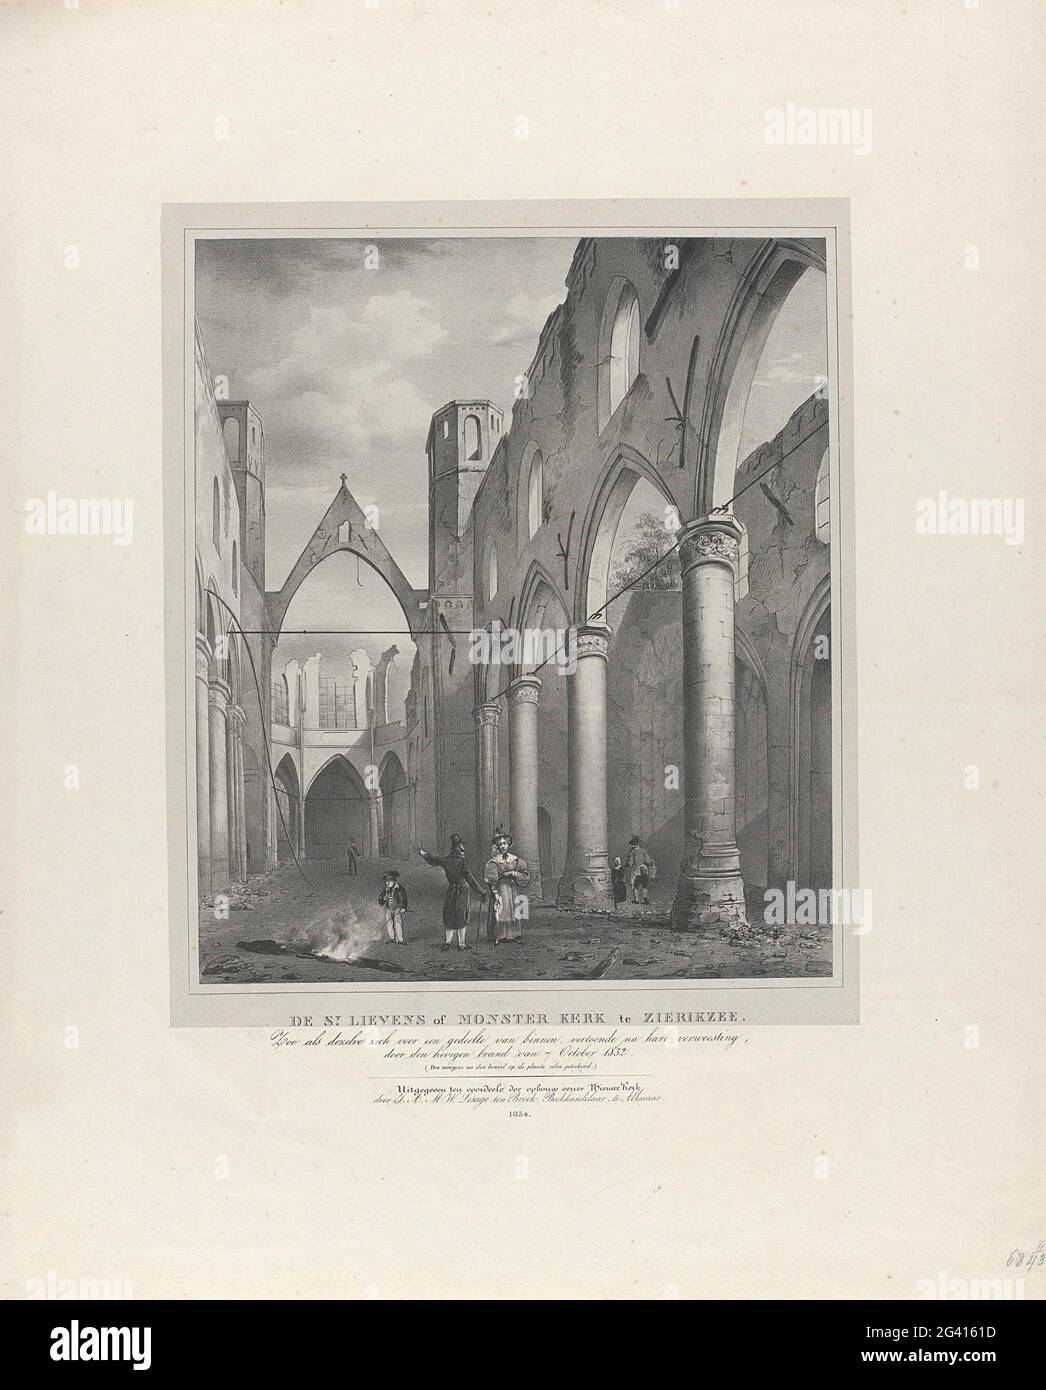 Ruin of the Sint-Lievensmonsterkerk in Zierikzee, after the fire of 1832; The St. Lievens or Monster Church in Zierikzee. For a part of the inside, so as it showed after her devastation, because of the fee of 7 October 1832. Interior of the Sint-Lievensmonsterkerk in Zierikzee, in welfare, before the fire of 6 October 1832. View in the interior to it Organ. Stock Photo